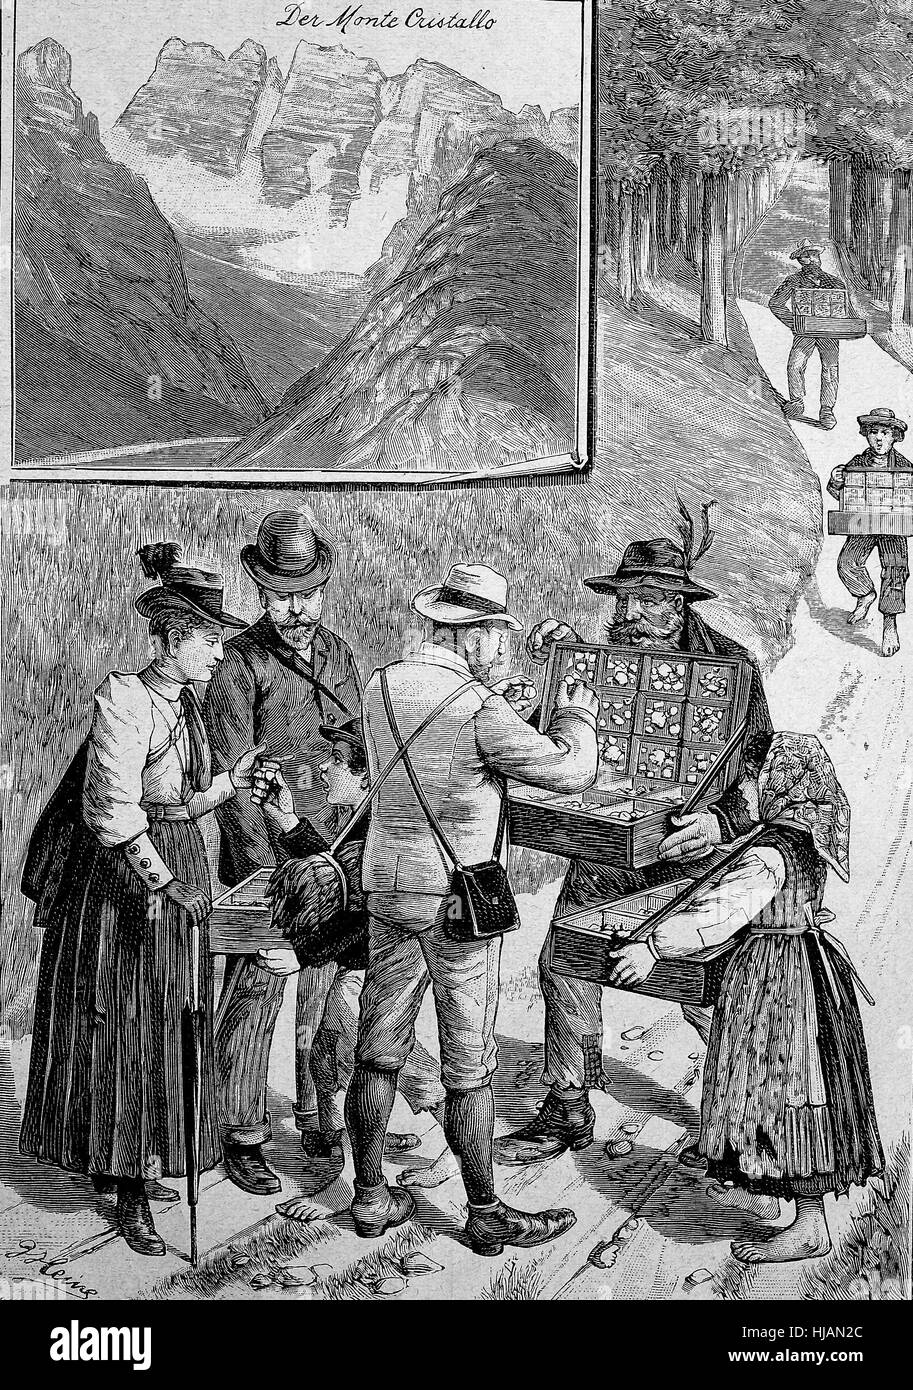 Monte Cristallo, Kristallberg, a mountain in the Italian Dolomites, northeast of Cortina d' Ampezzo, in the province of Belluno, Veneto, Italy. A seller offers Rock crystal to the tourists., historical image or illustration from the year 1894, digital improved Stock Photo